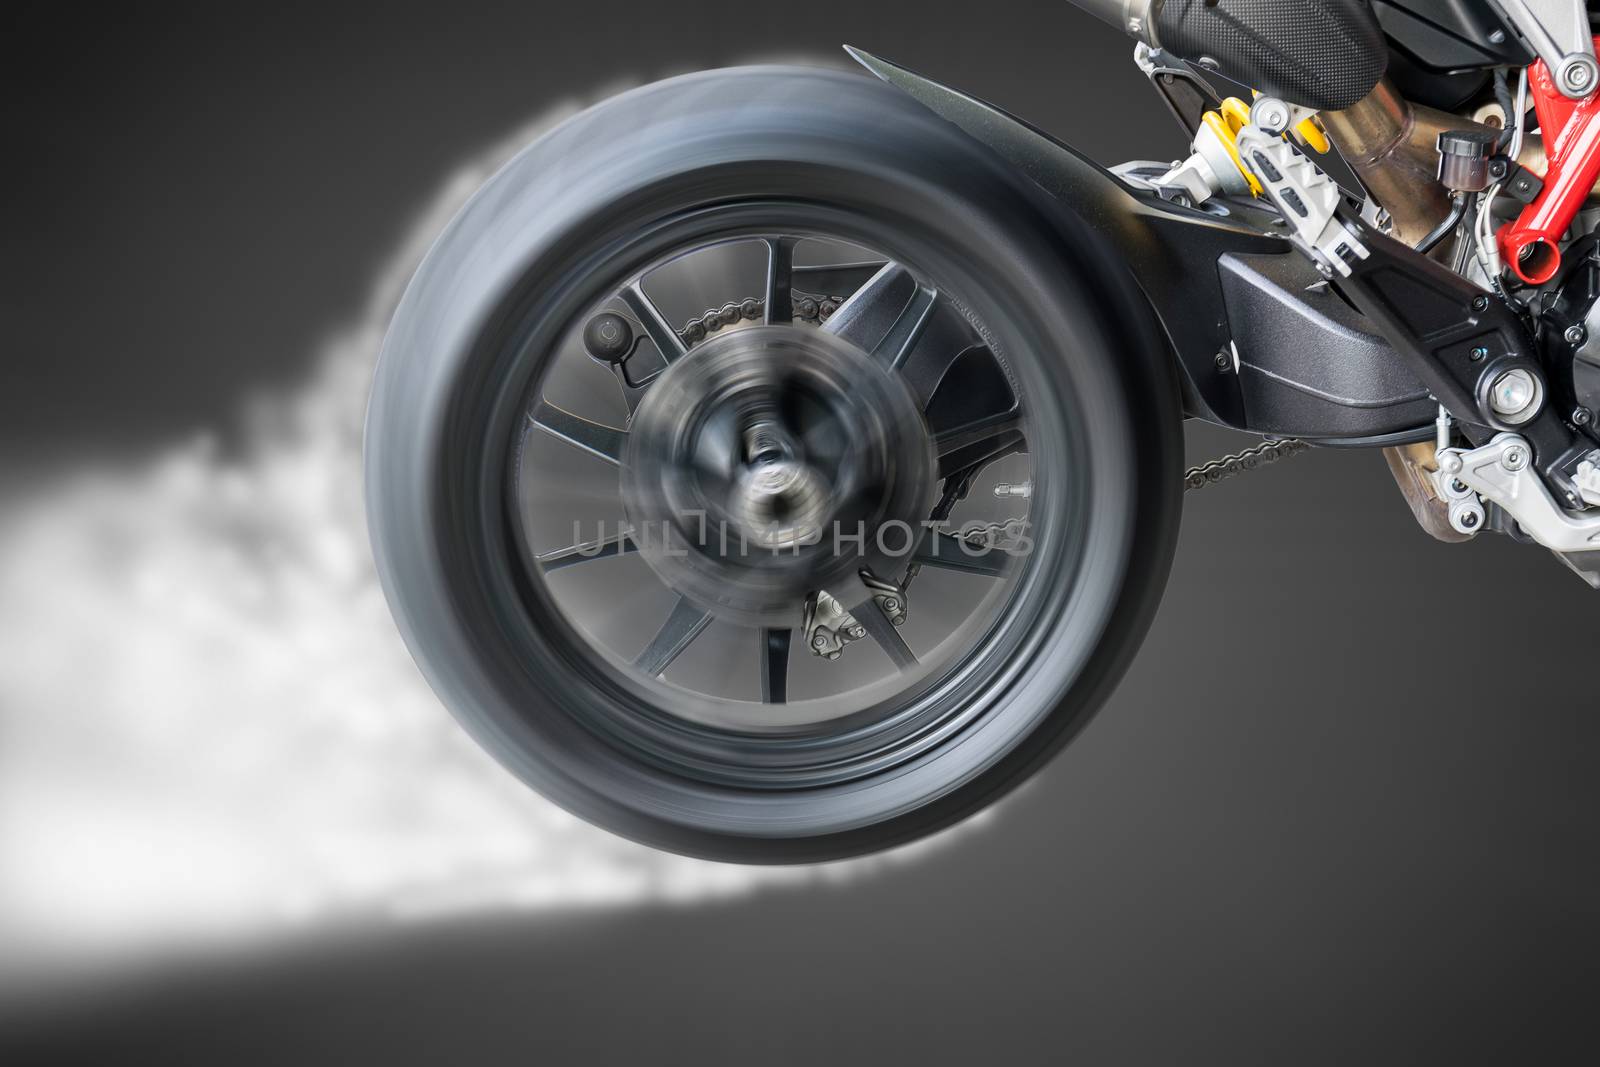 Test the rotation of the wheel and the burning of a motorcycle tire.